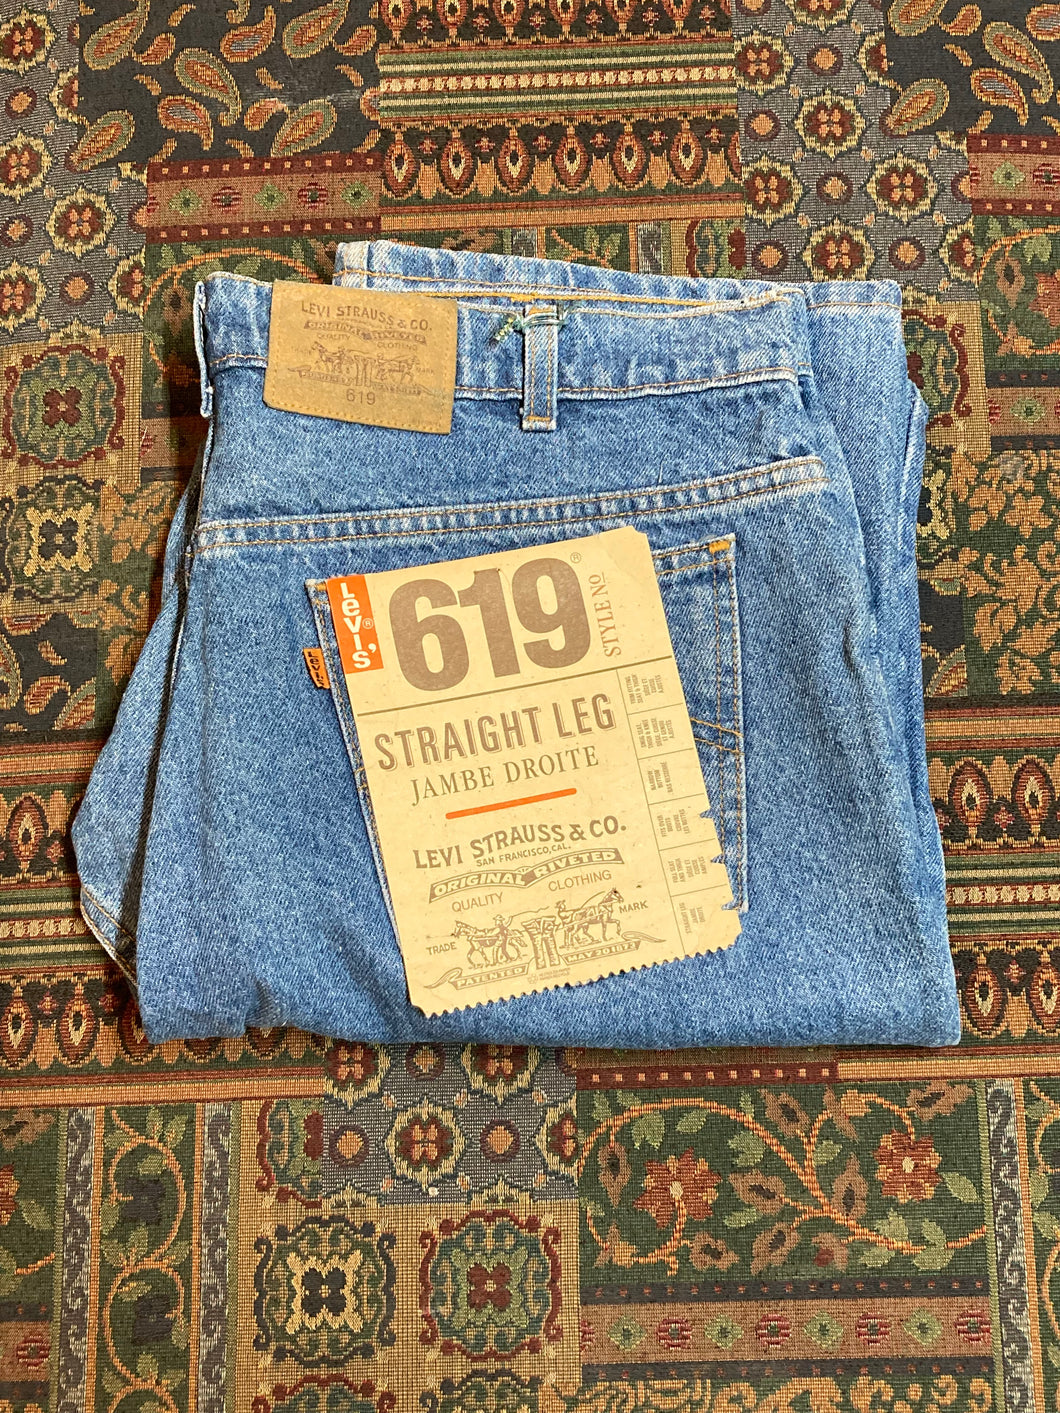 Levi’s 619 Denim Jeans, new with tags  Vintage Deadstock  Orange Tab  High Waist  Straight leg  Labeled 38”x32”  Button stamped “C63”  Made in Canada - Kingspier Vintage